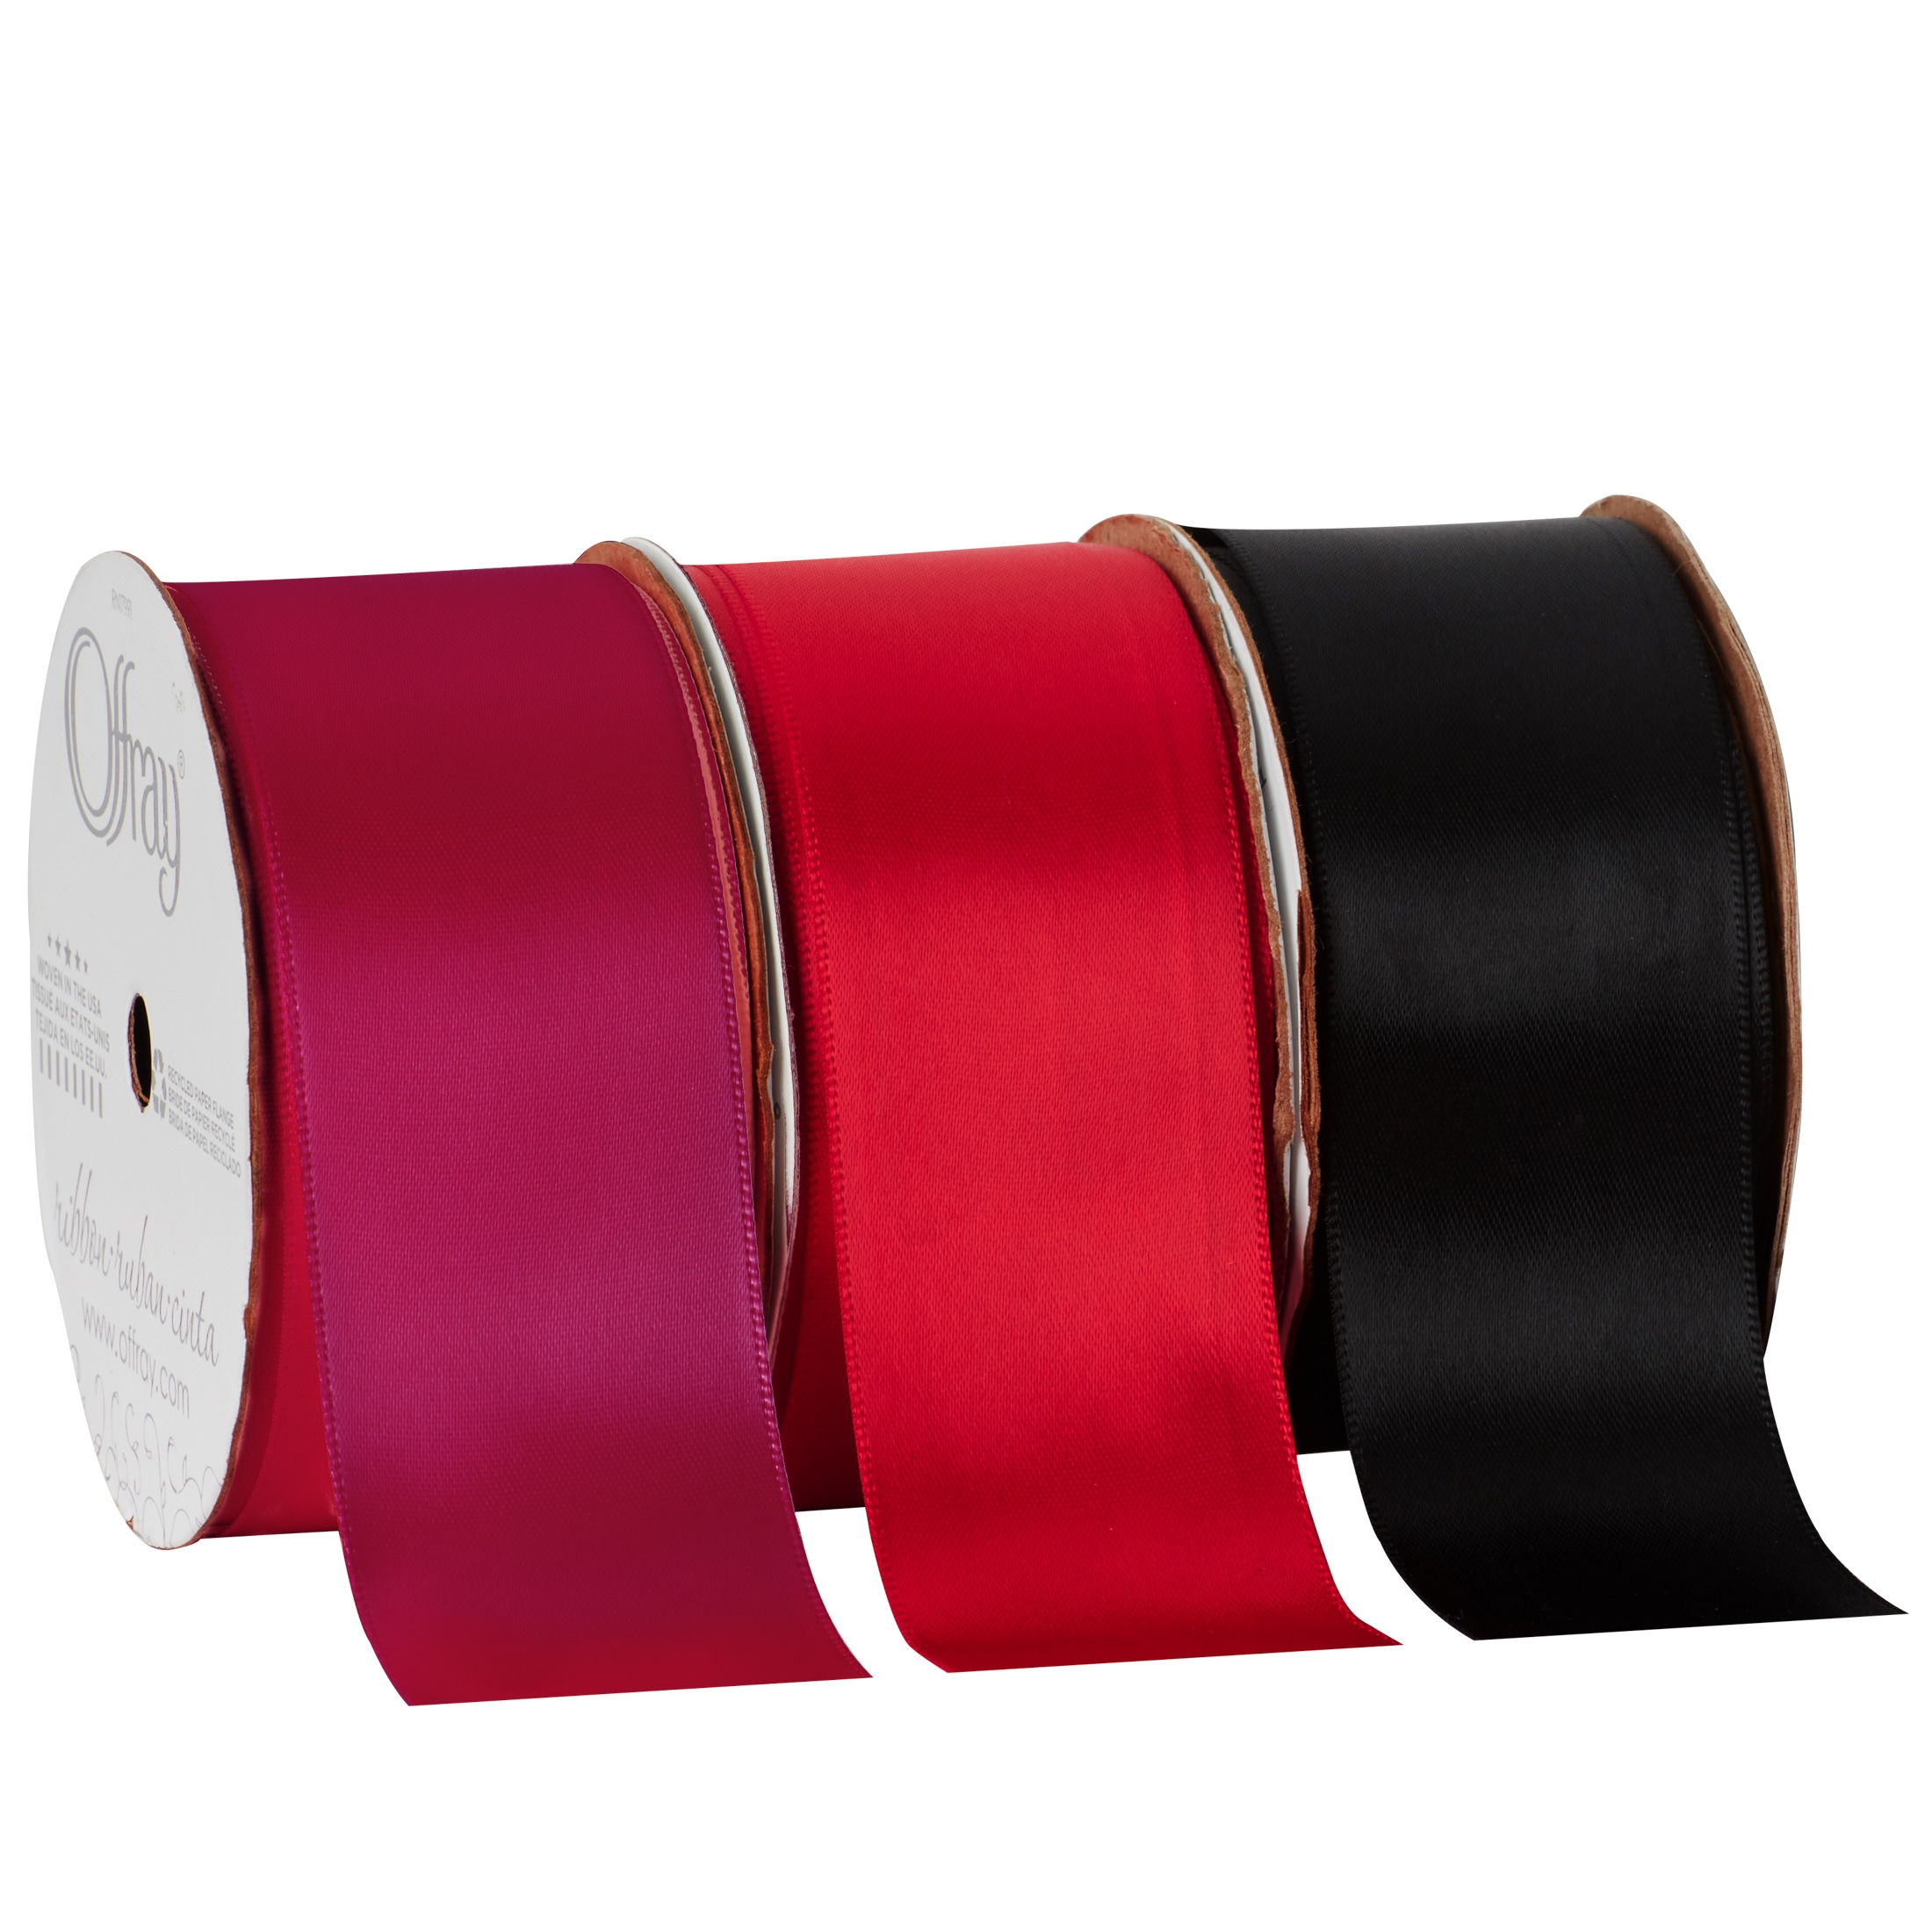 3/8 Satin Double-Faced Ribbon by 360° in Red by Celebrate It